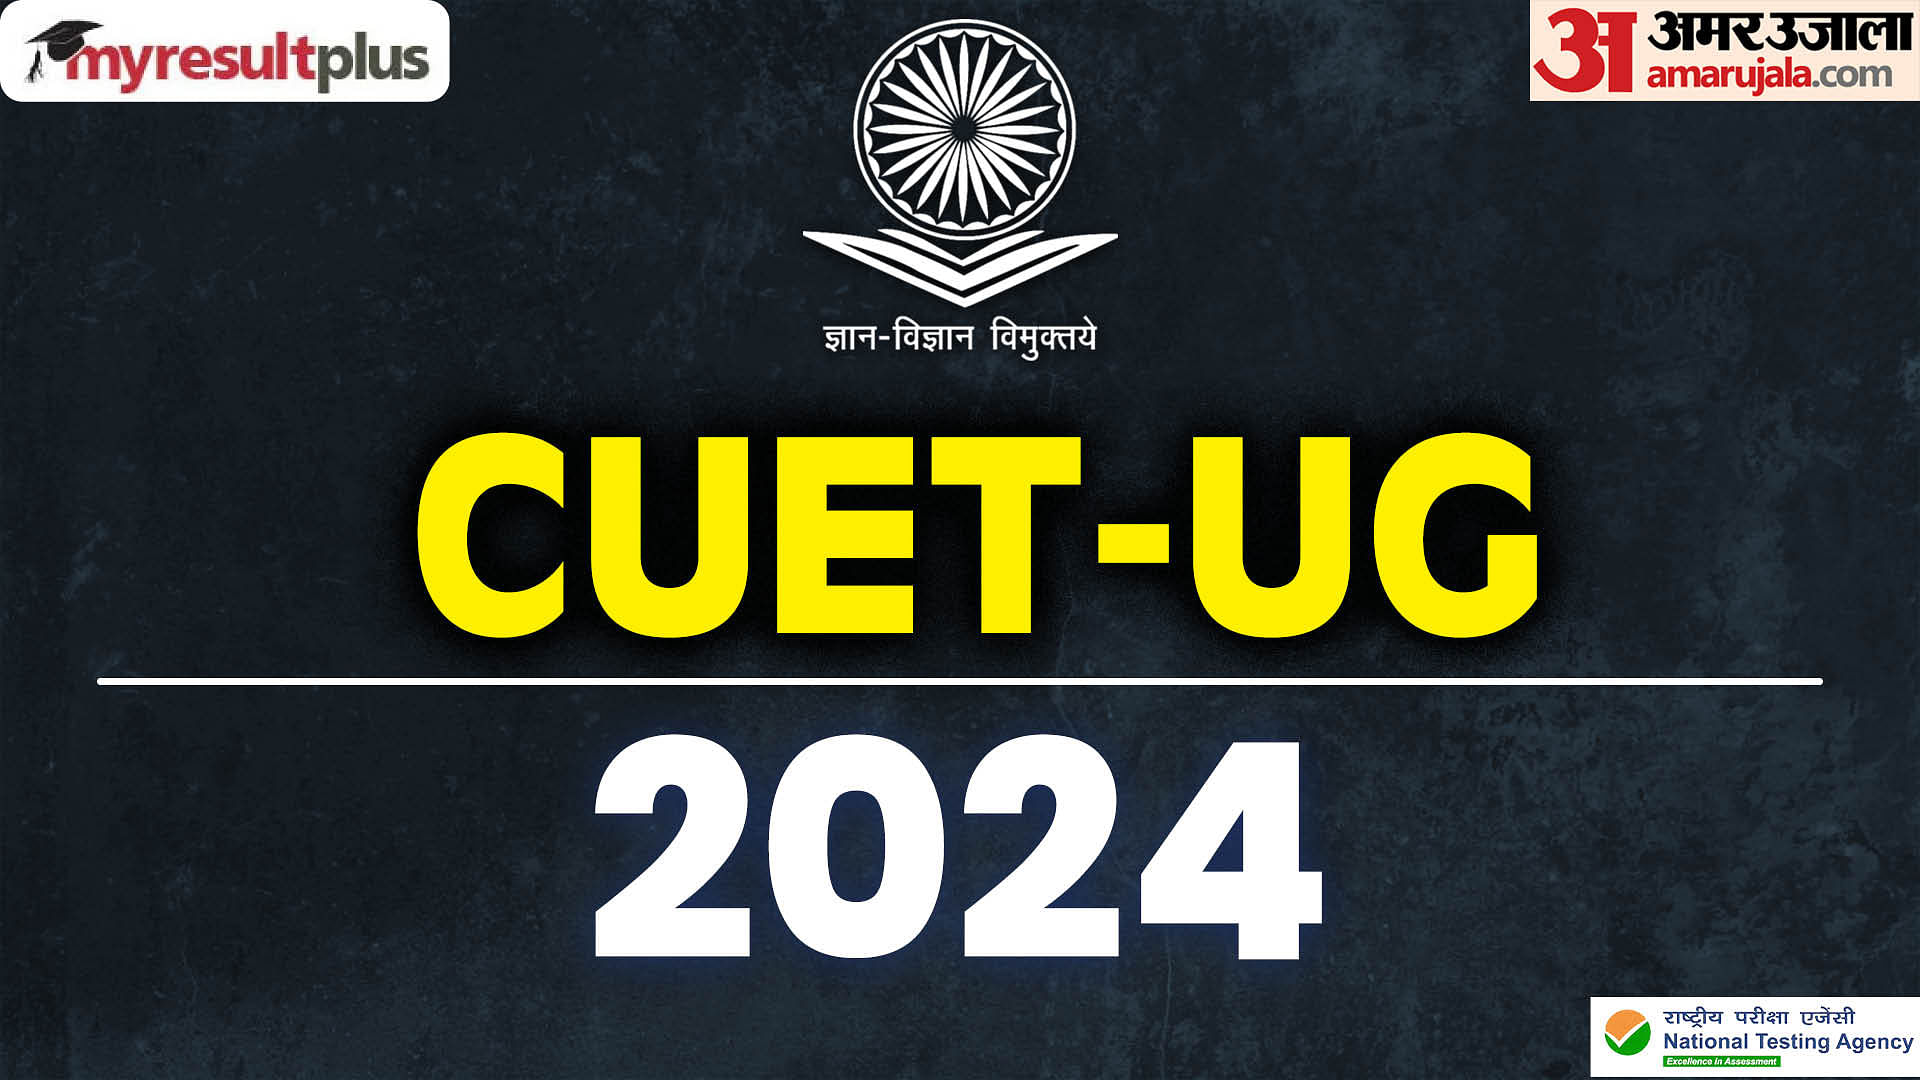 CUET UG 2024 city intimation slip releasing soon, Download from exams.nta.ac.in/CUET-UG, Read here